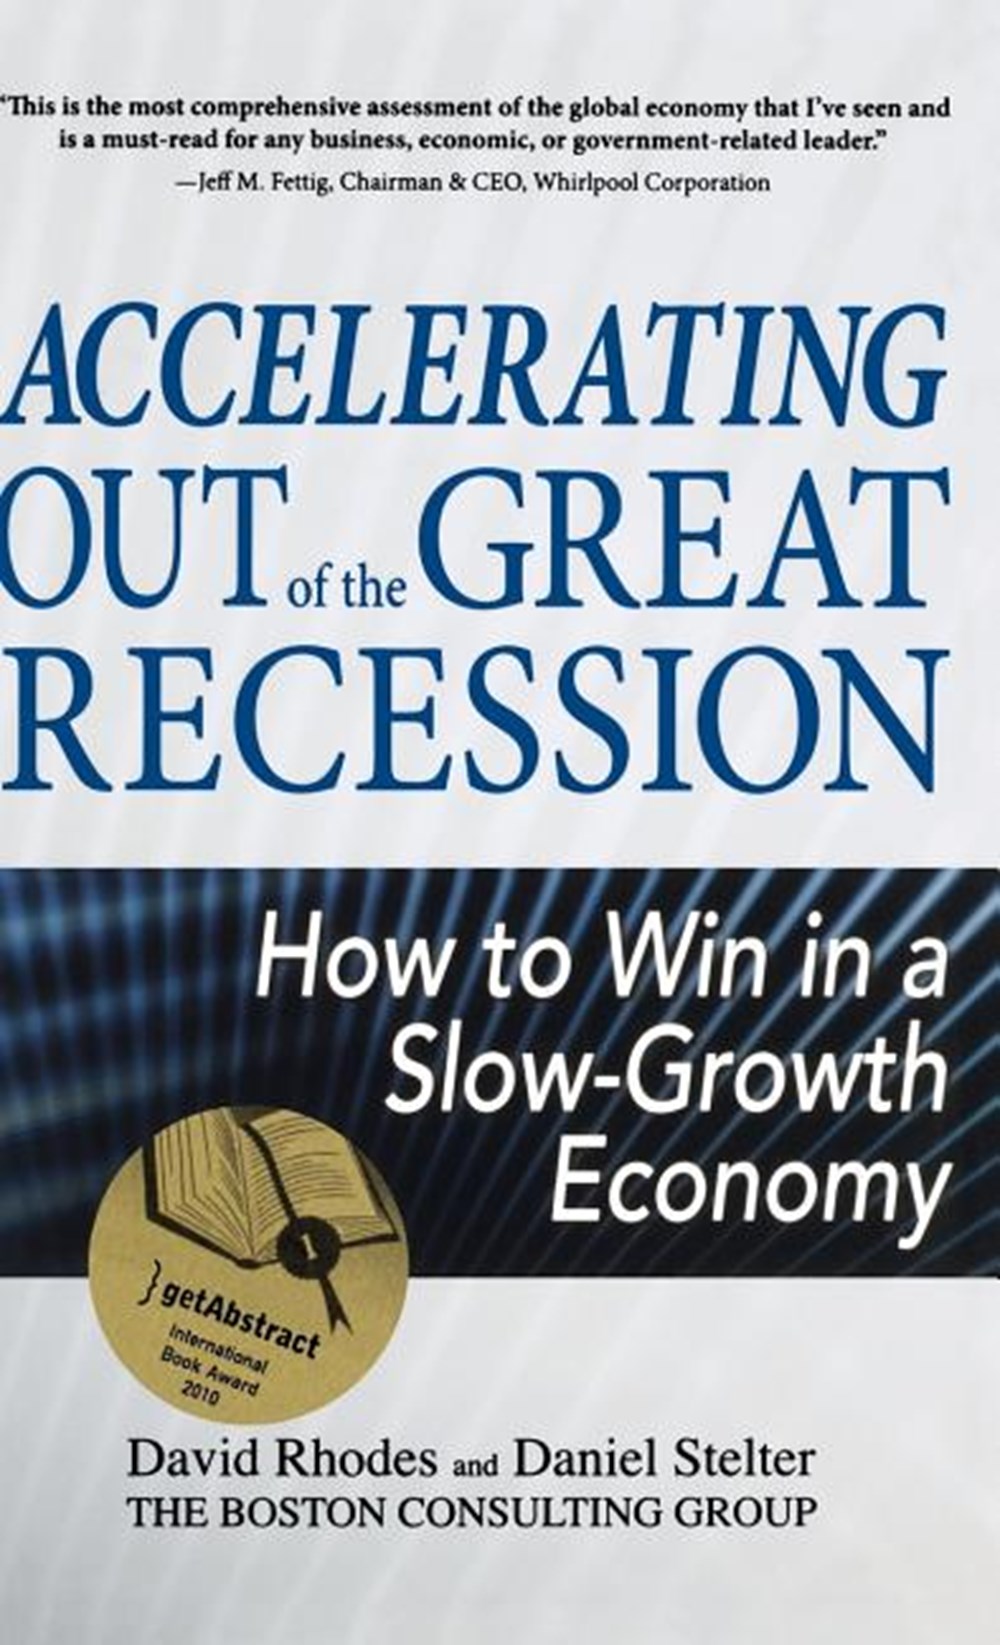 Accelerating Out of the Great Recession: How to Win in a Slow-Growth Economy